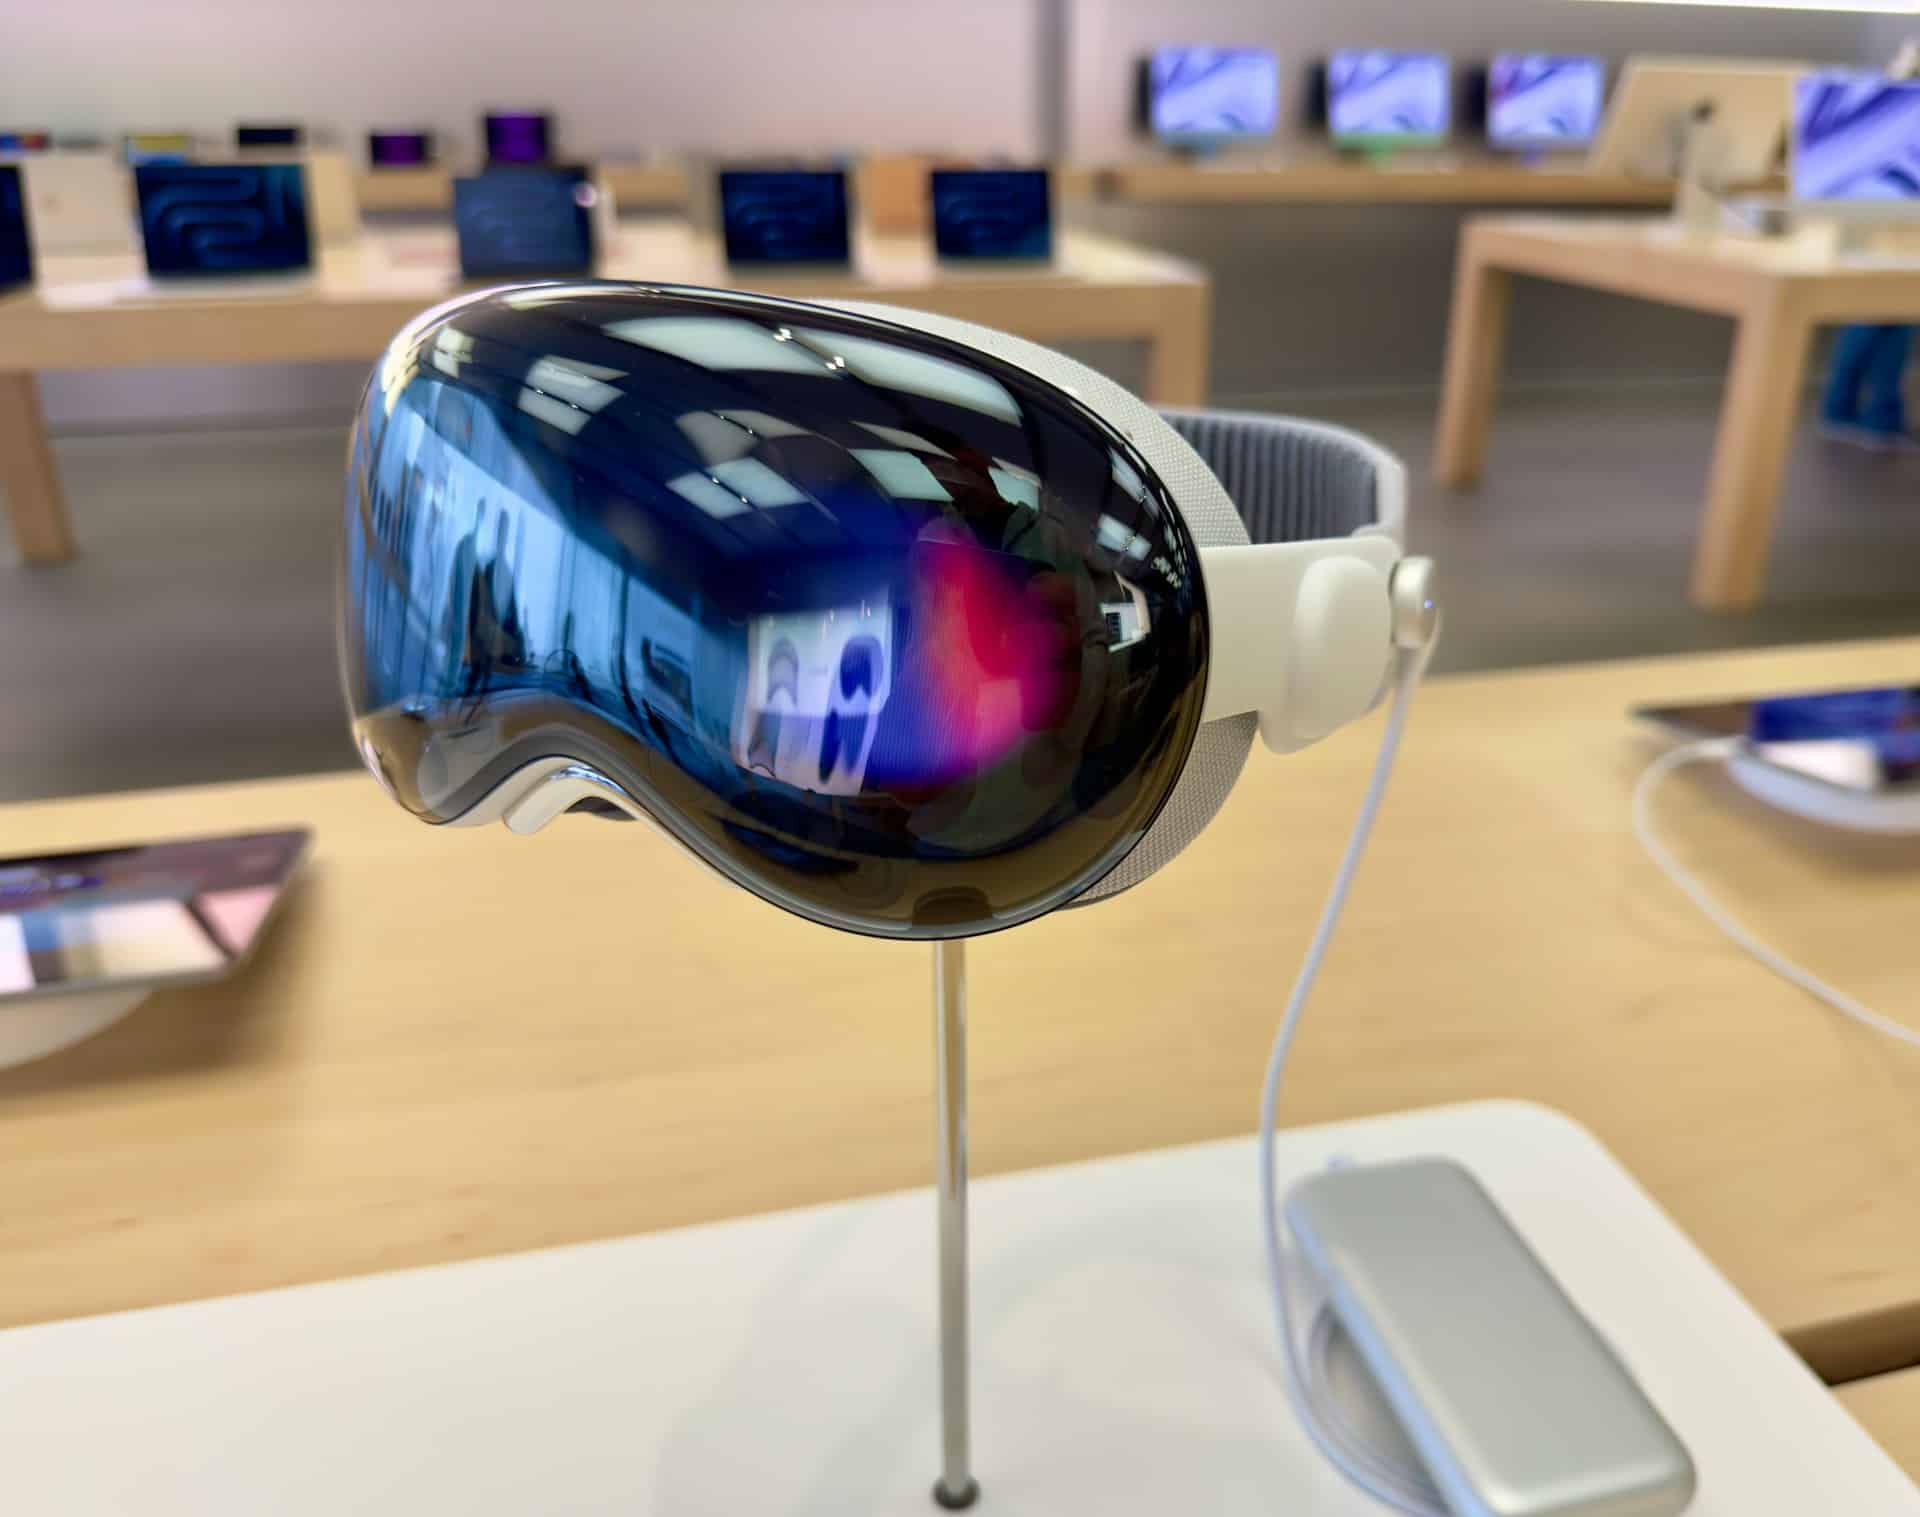 Apple Vision Pro users Return Headsets, Report Headaches and Nausea